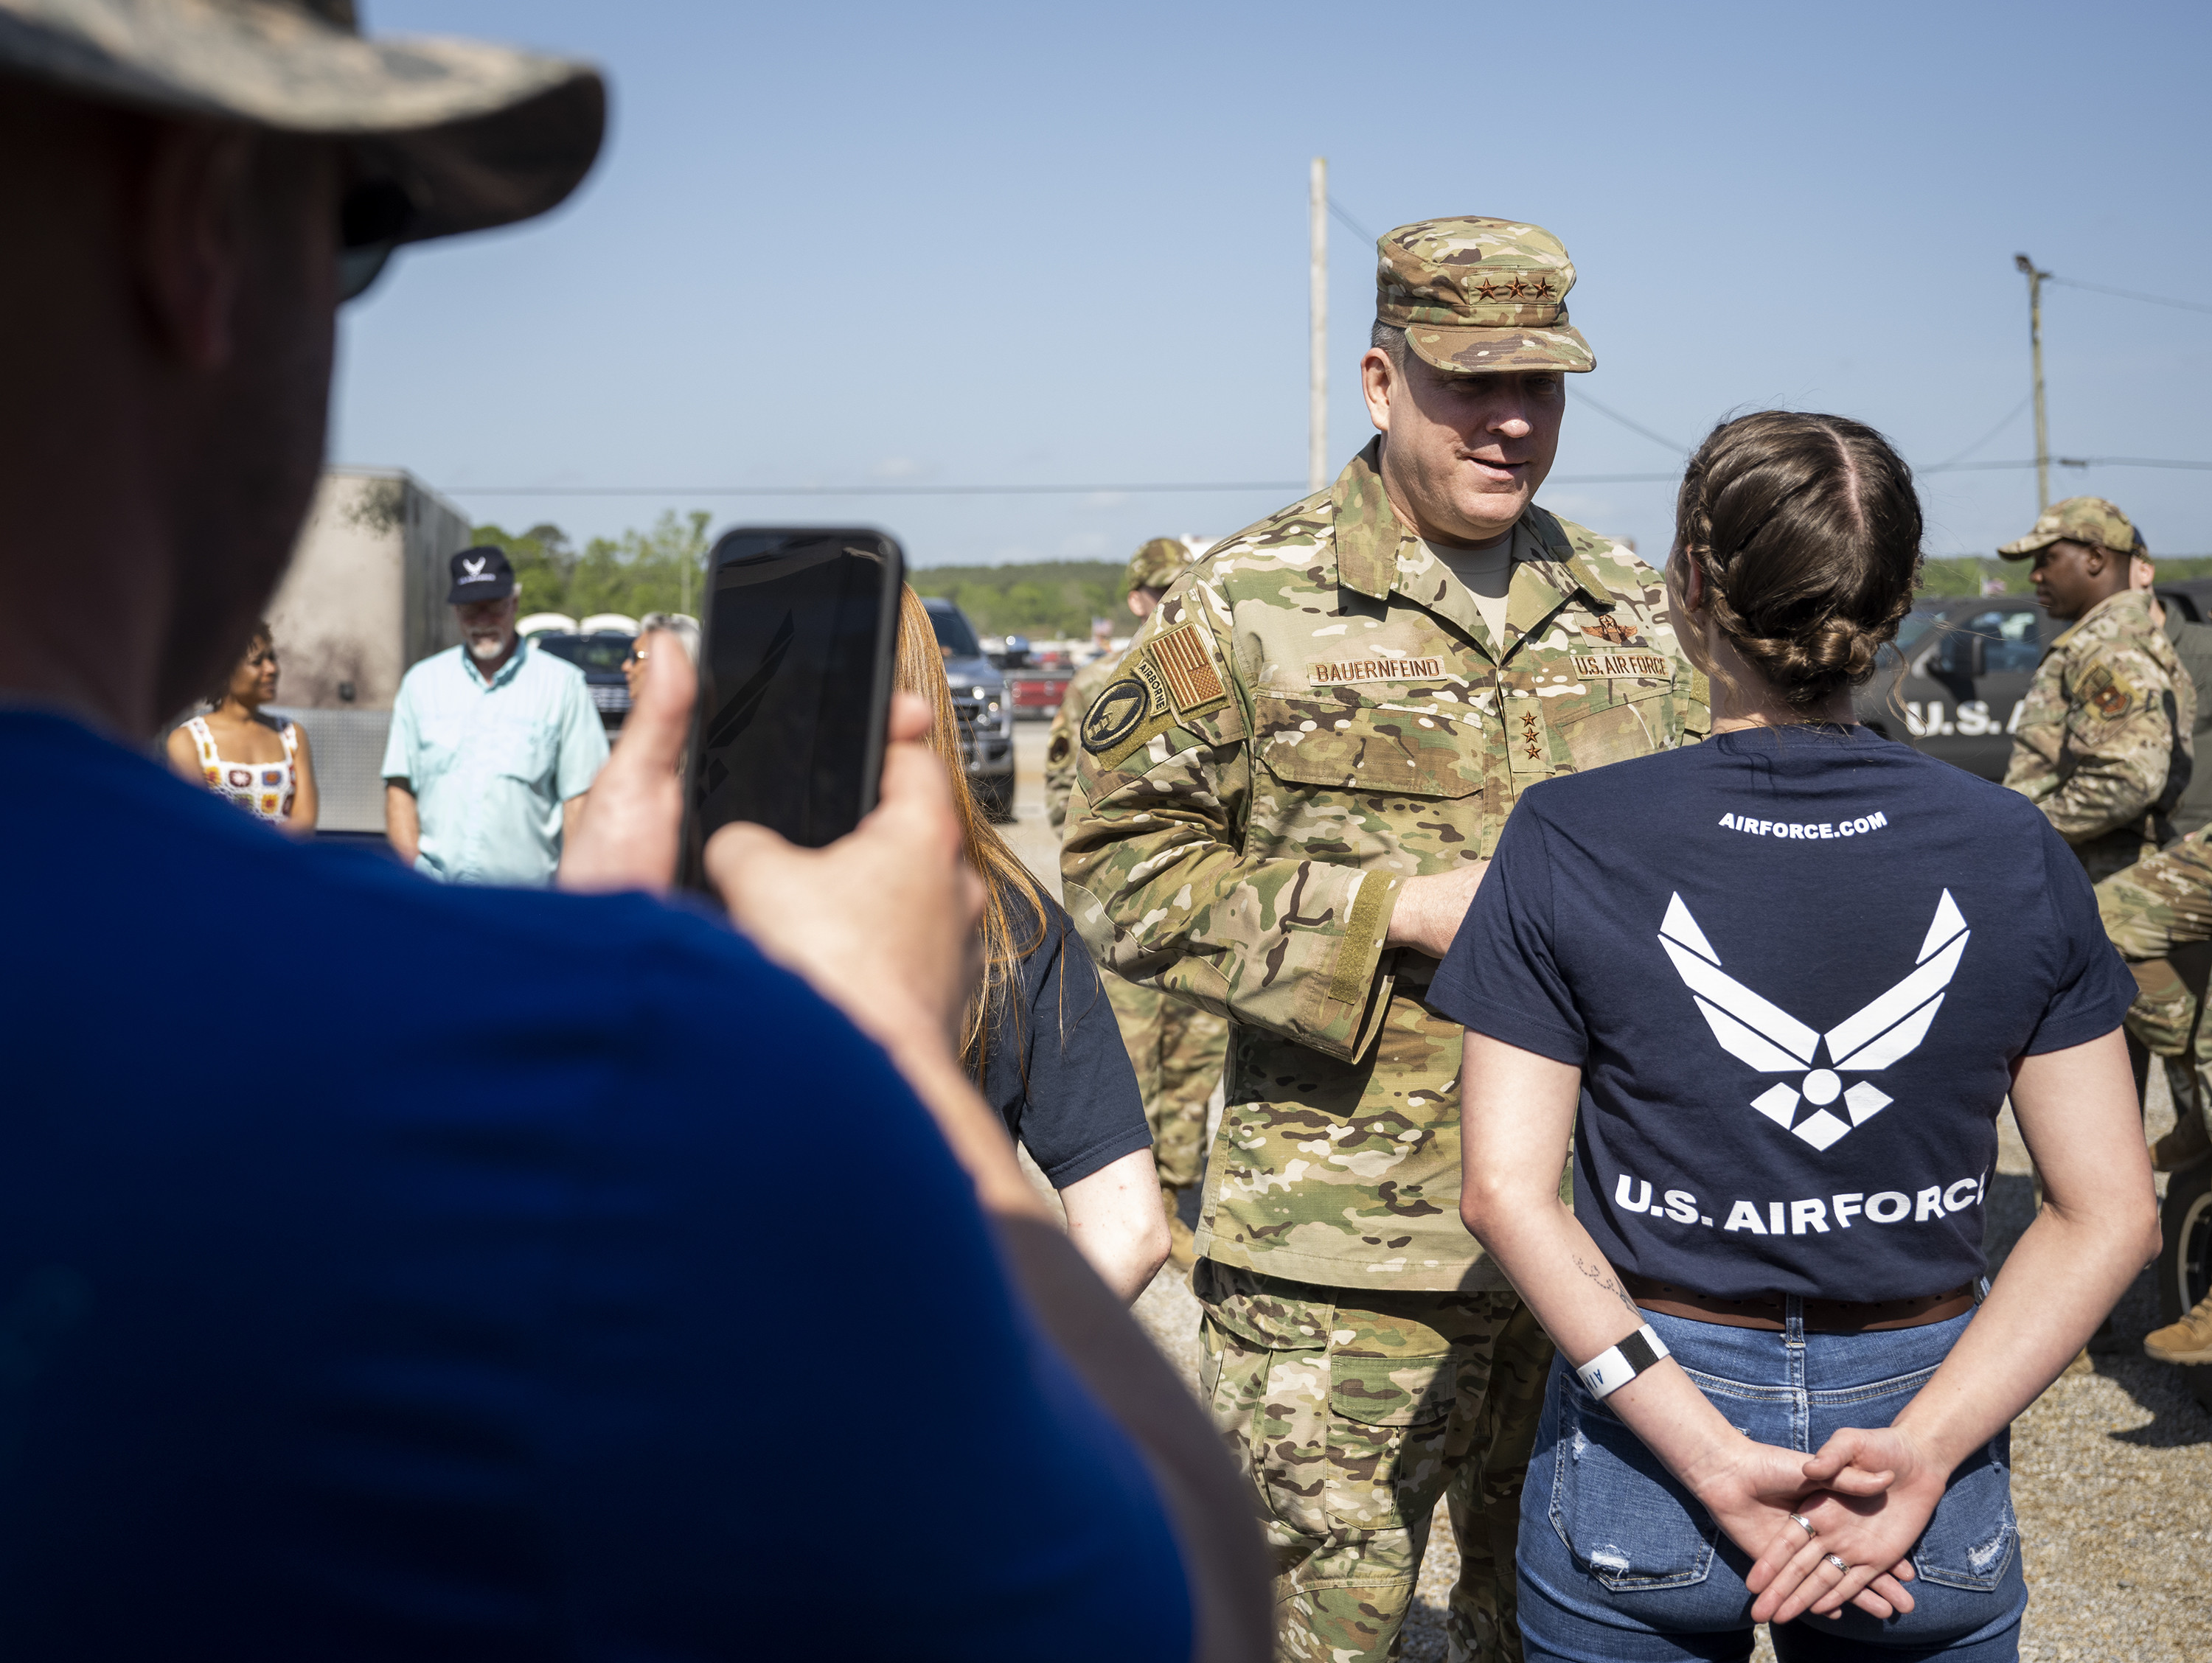 Air Force Recruiting Service relaunches as a Total Force